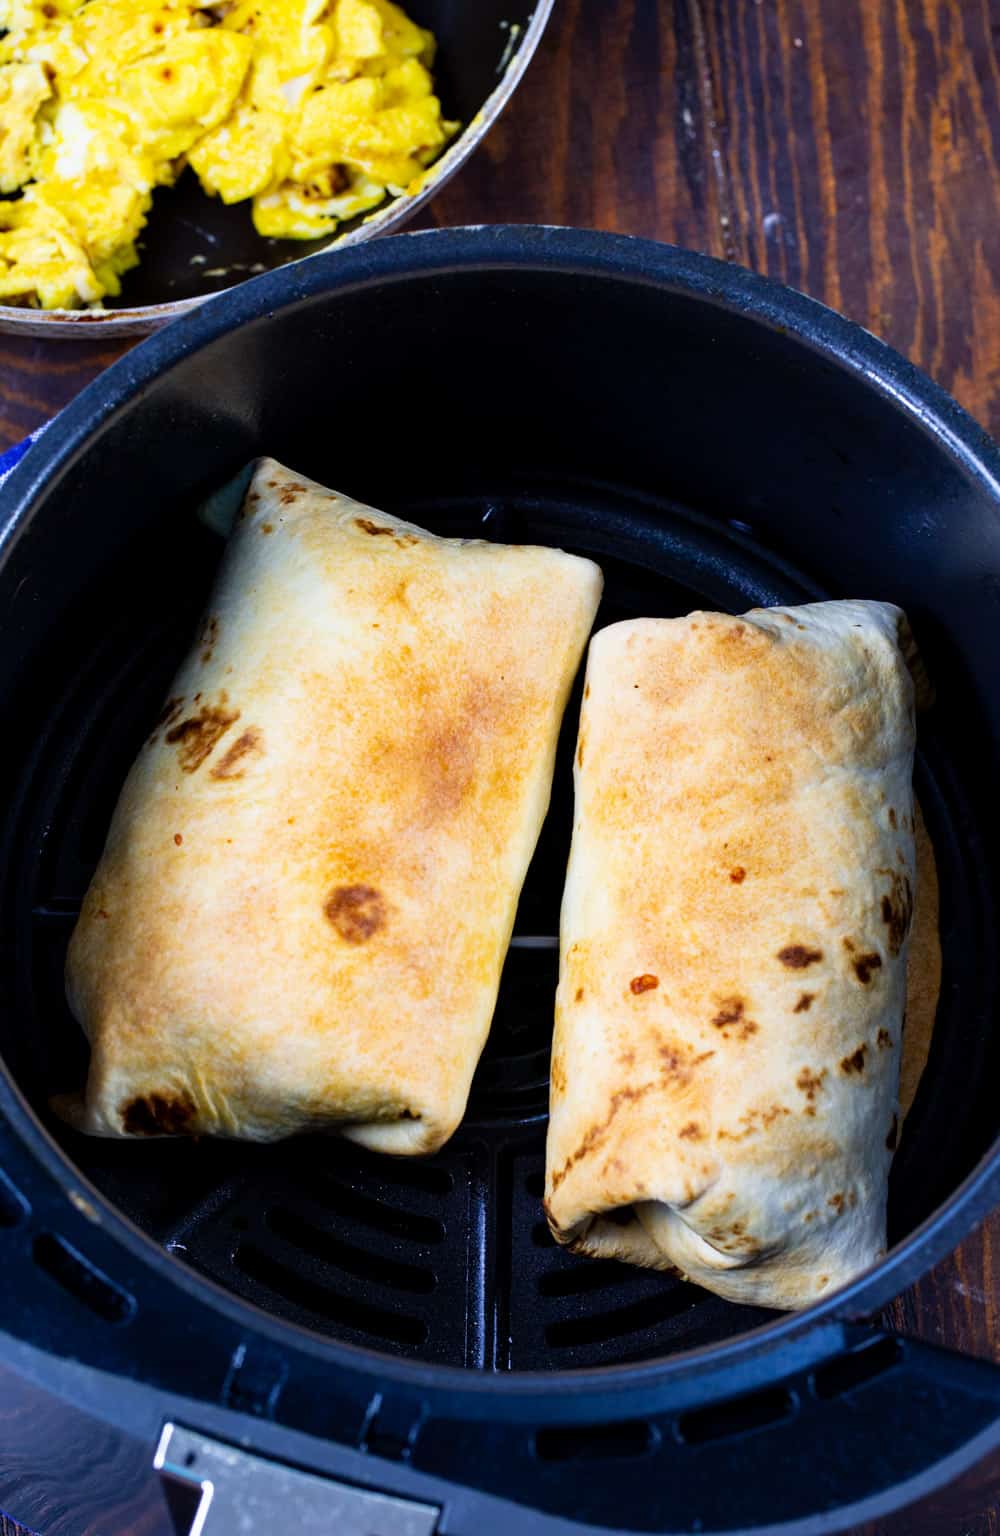 How To Reheat Burrito In Air Fryer